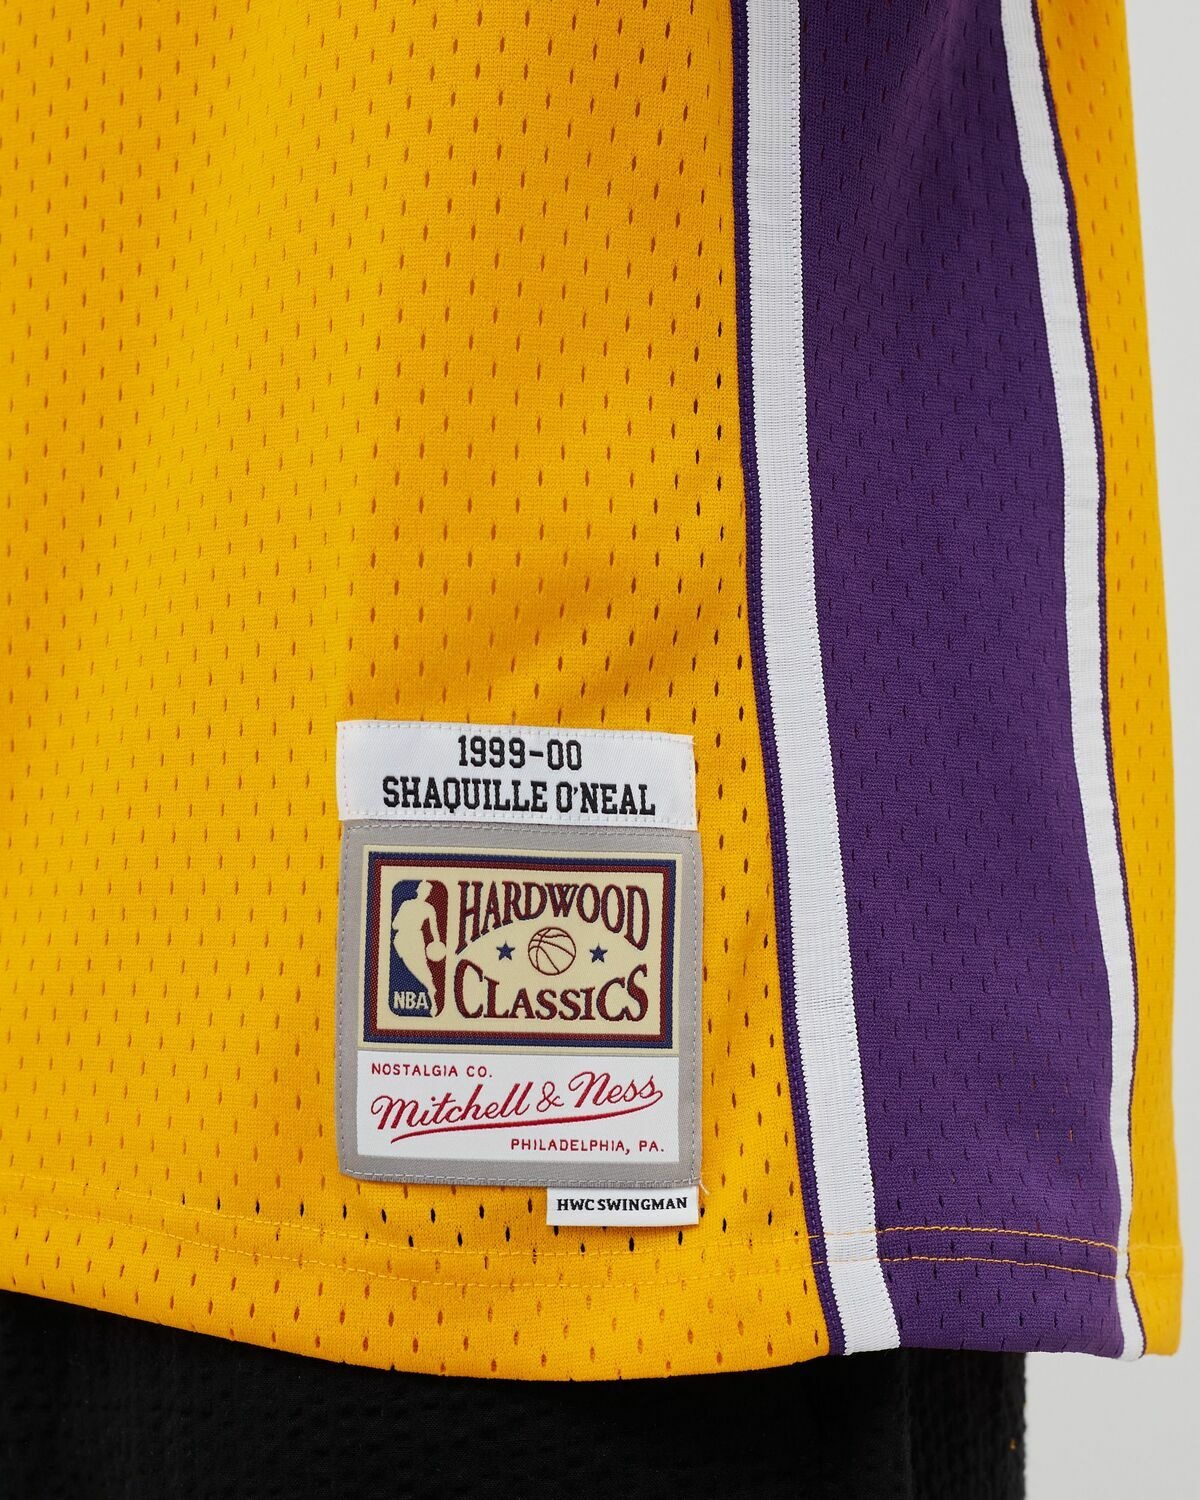 Mitchell & Ness Nba Swingman Jersey Los Angeles Lakers Home 1999 00 Shaquille O'neal #34 Yellow - Mens - Jerseys